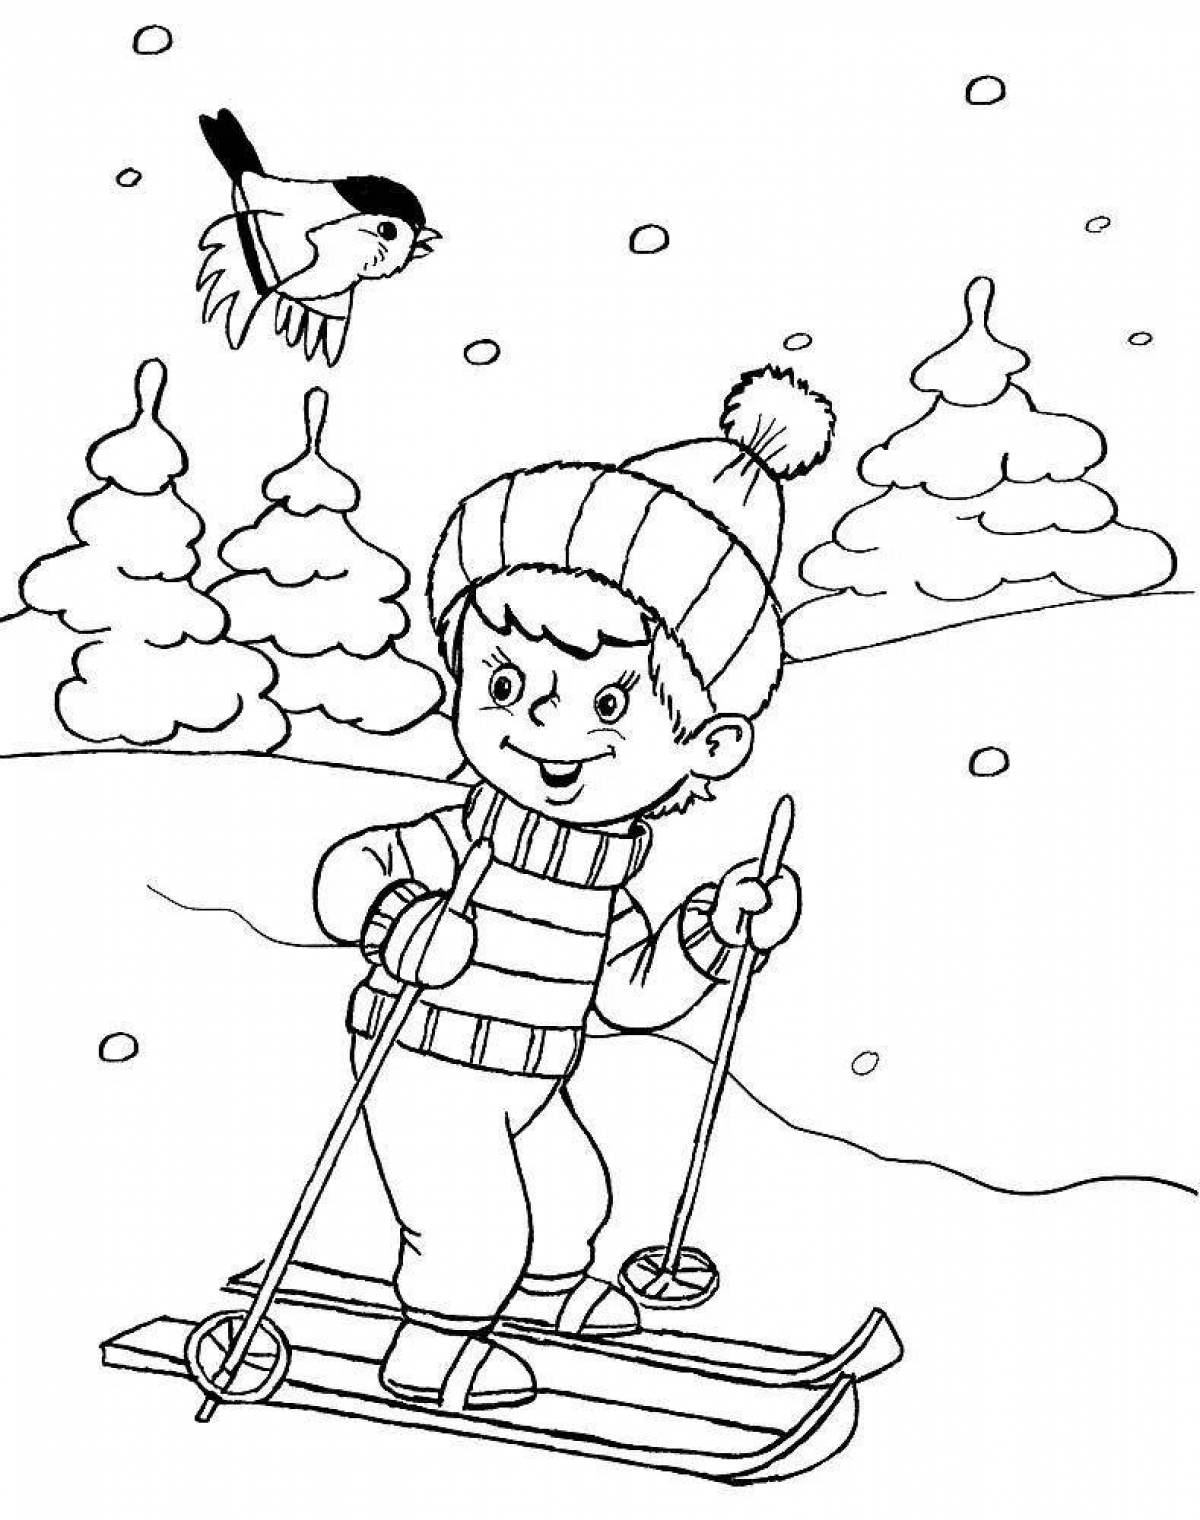 Creative winter coloring book for 3-4 year olds